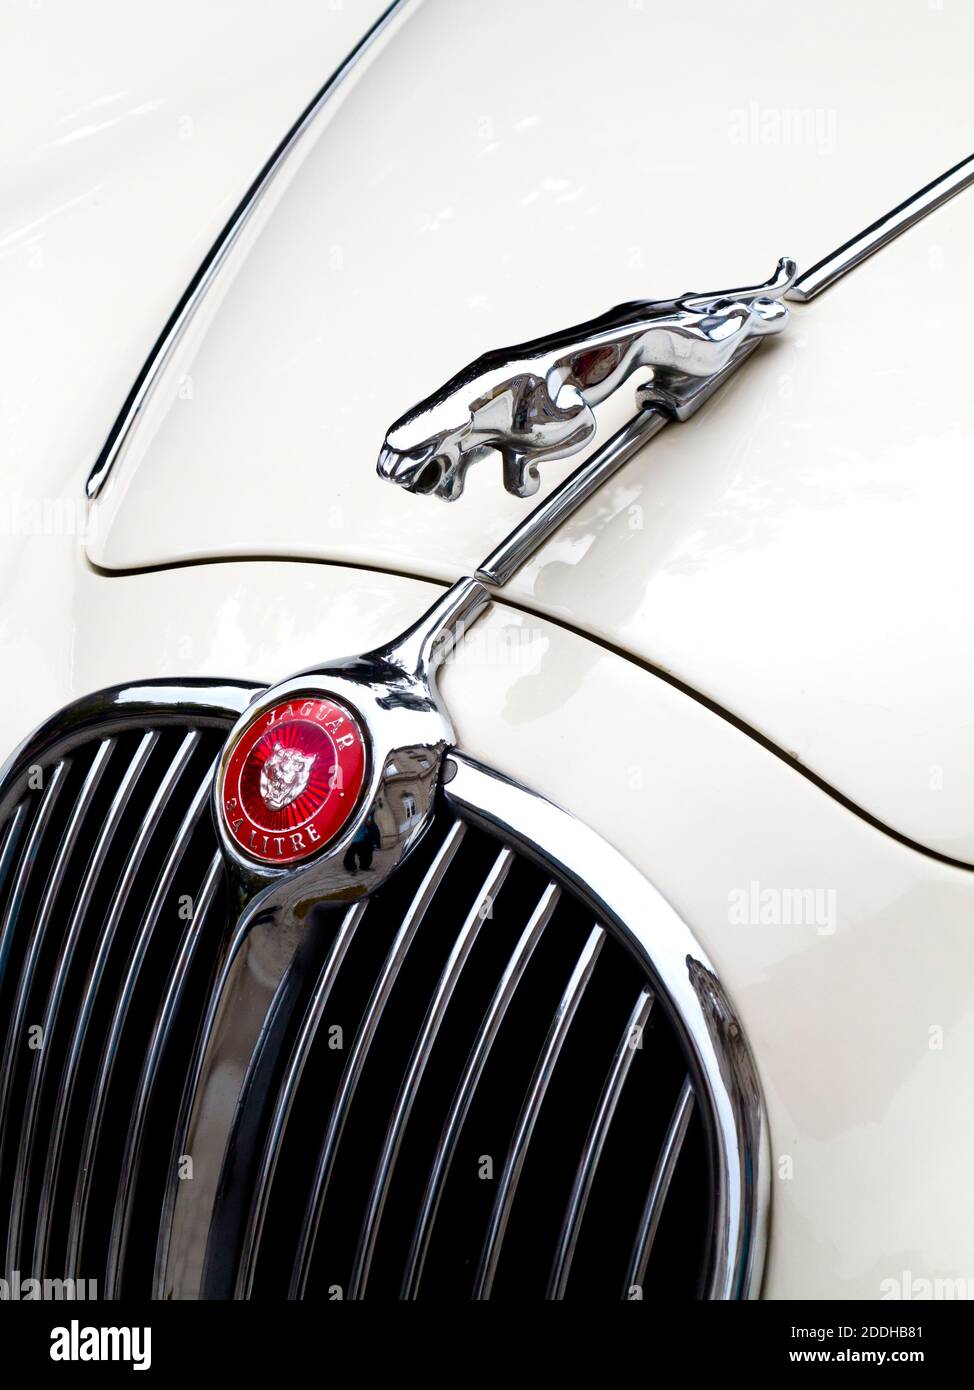 Detail of bonnet and radiator on a Jaguar Mark 2 3.4 Litre a mid sized luxury sports saloon car produced in Coventry England from 1959 until 1967. Stock Photo